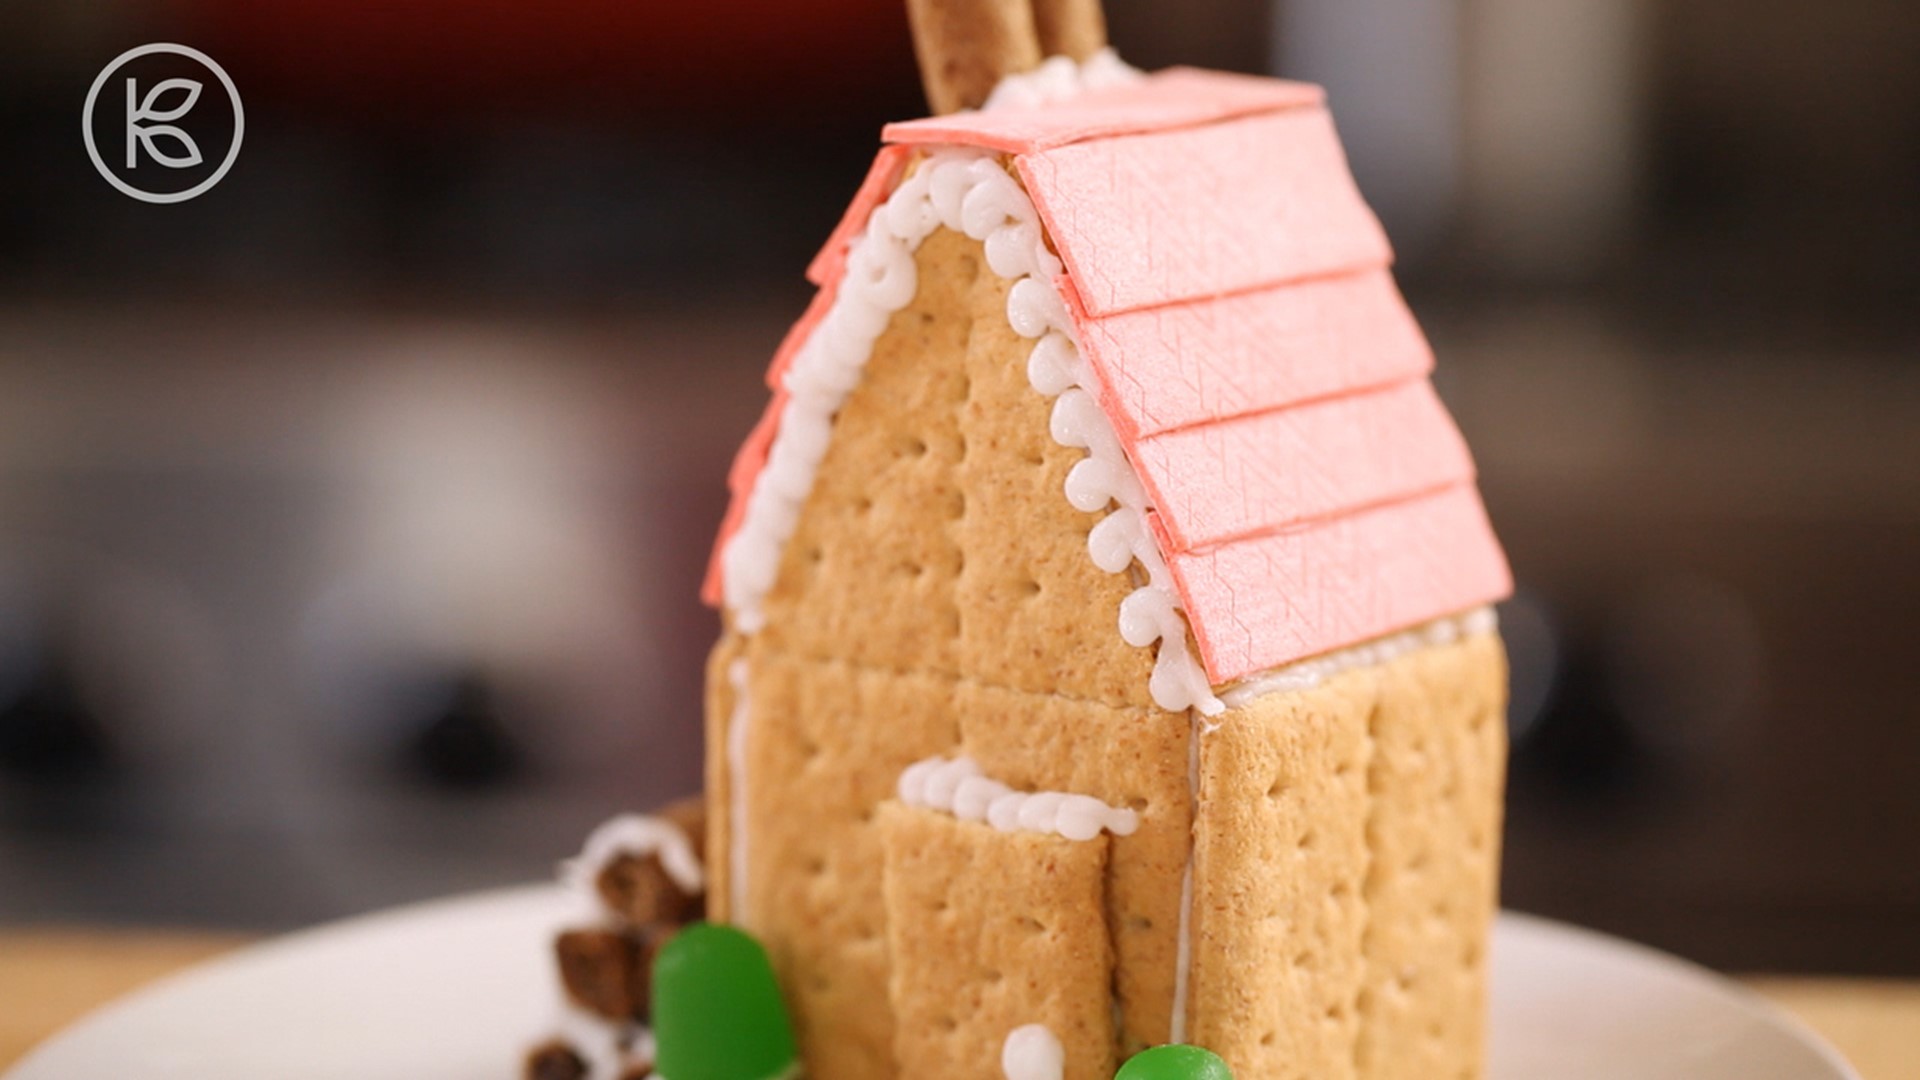 Our Kin Producer Robert Maher shows us how to create a wonderful Graham Cracker House for the holidays.

This project was compiled by our Kin Parents Producer Robert Mahar. Find more of Robert's work at http://www.maharcraft.tumblr.com.